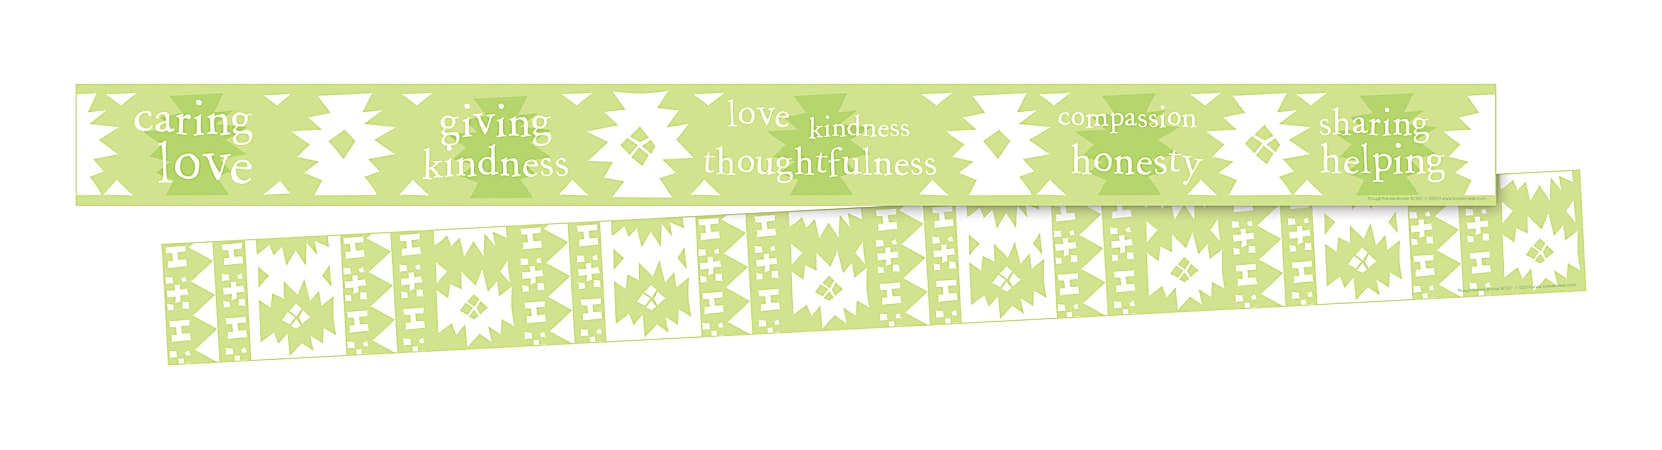 Barker Creek Double-Sided Borders, 3" x 35", Thoughtfulness, 12 Strips Per Pack, Set Of 2 Packs